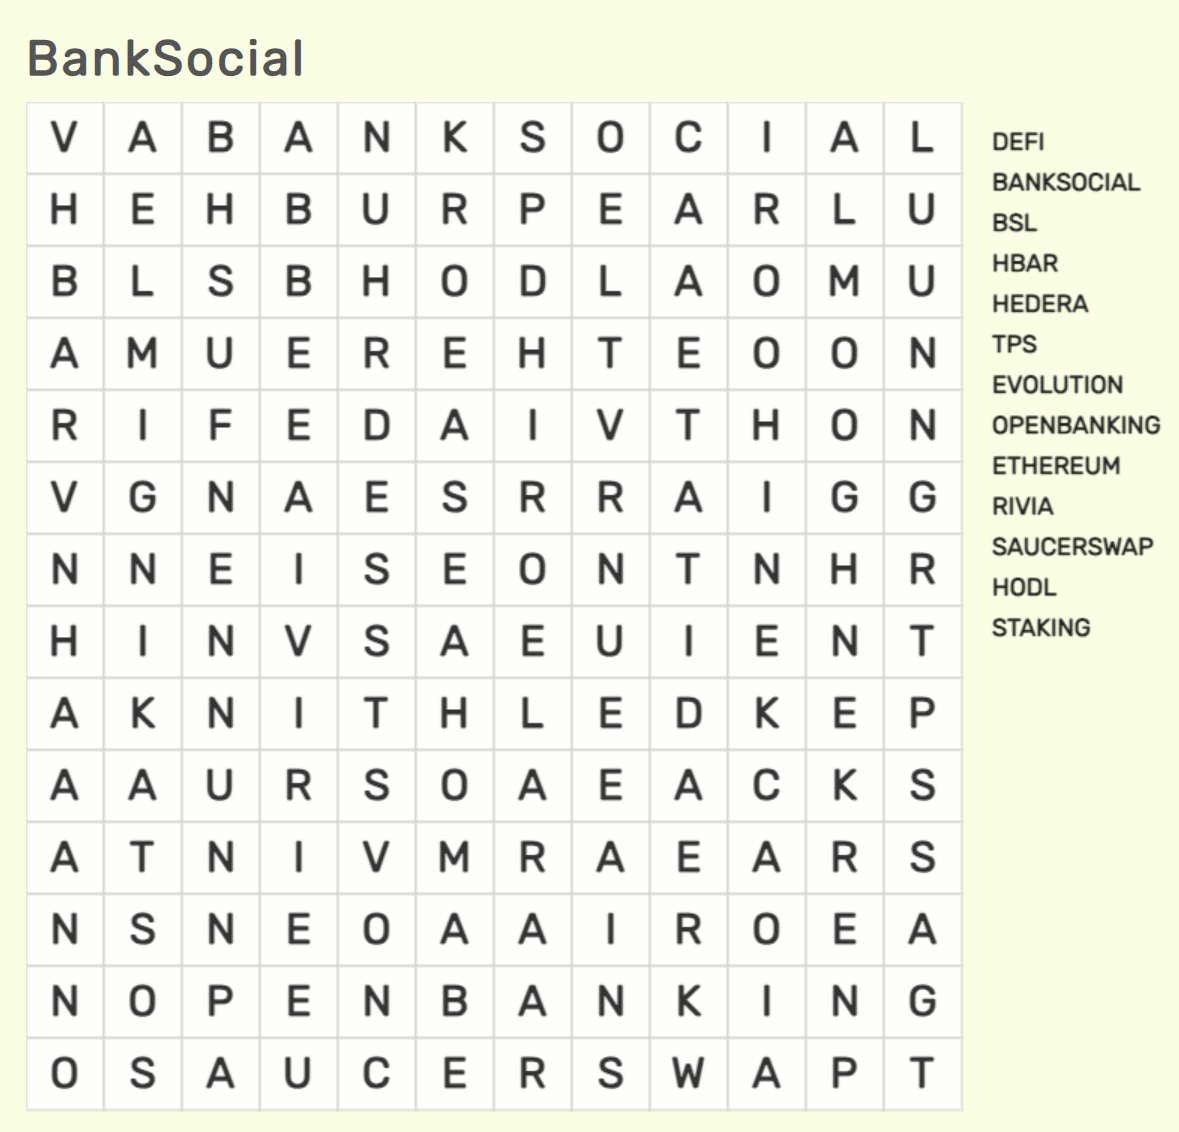 It's #WordSearch Wednesday!

Can you find all the hidden #BankSocial $BSL #BSL #Hedera #HBAR $HBAR terms? Let us know!

thewordsearch.com/puzzle/6792185…